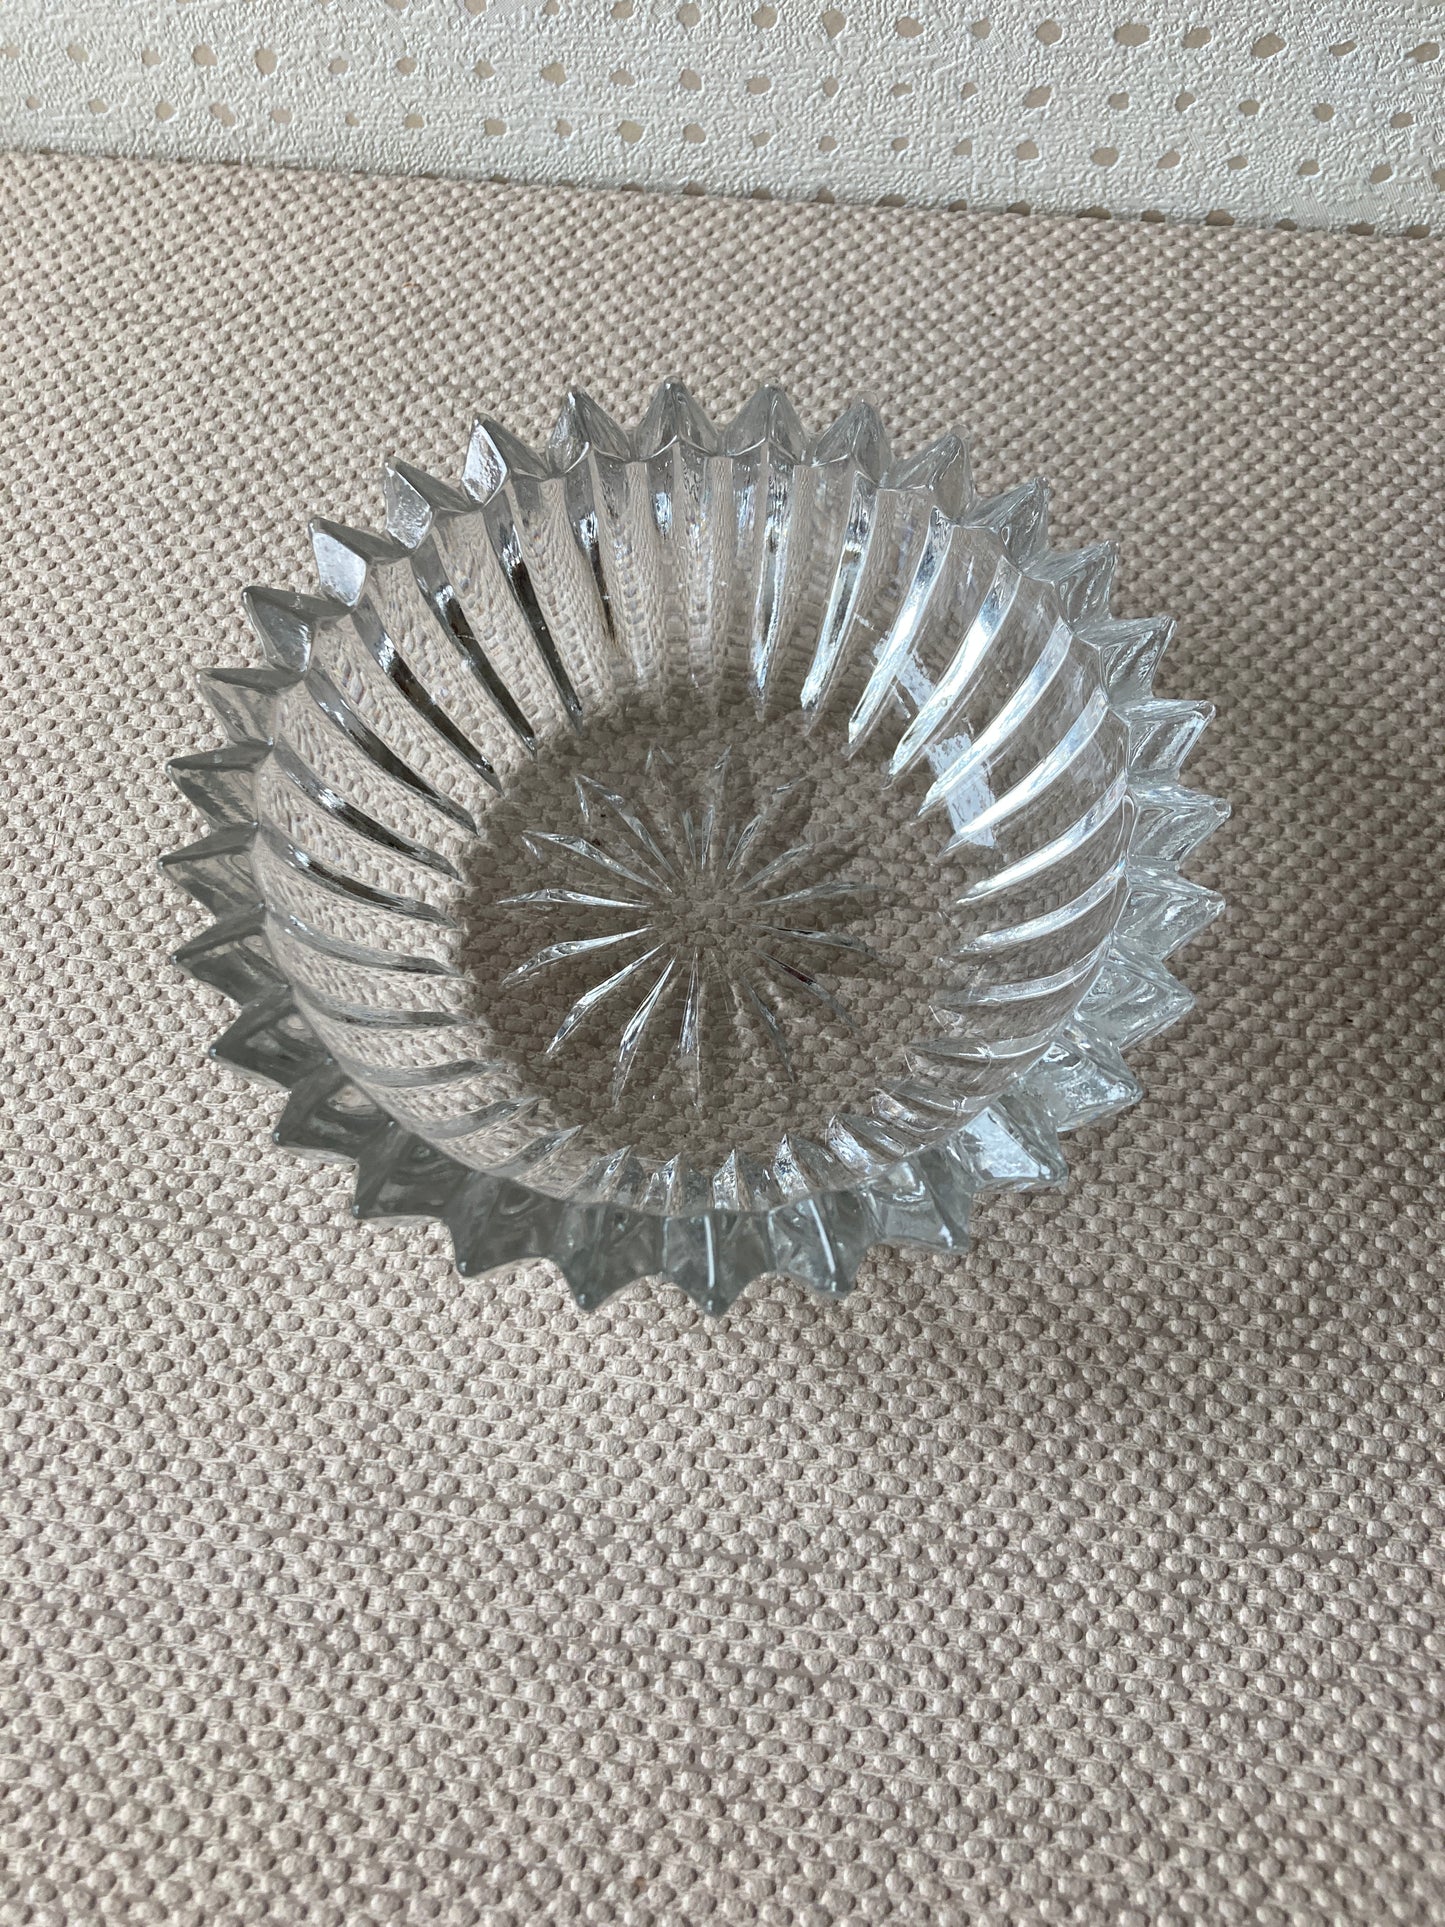 Small Trinket Dish with Serrated Edge